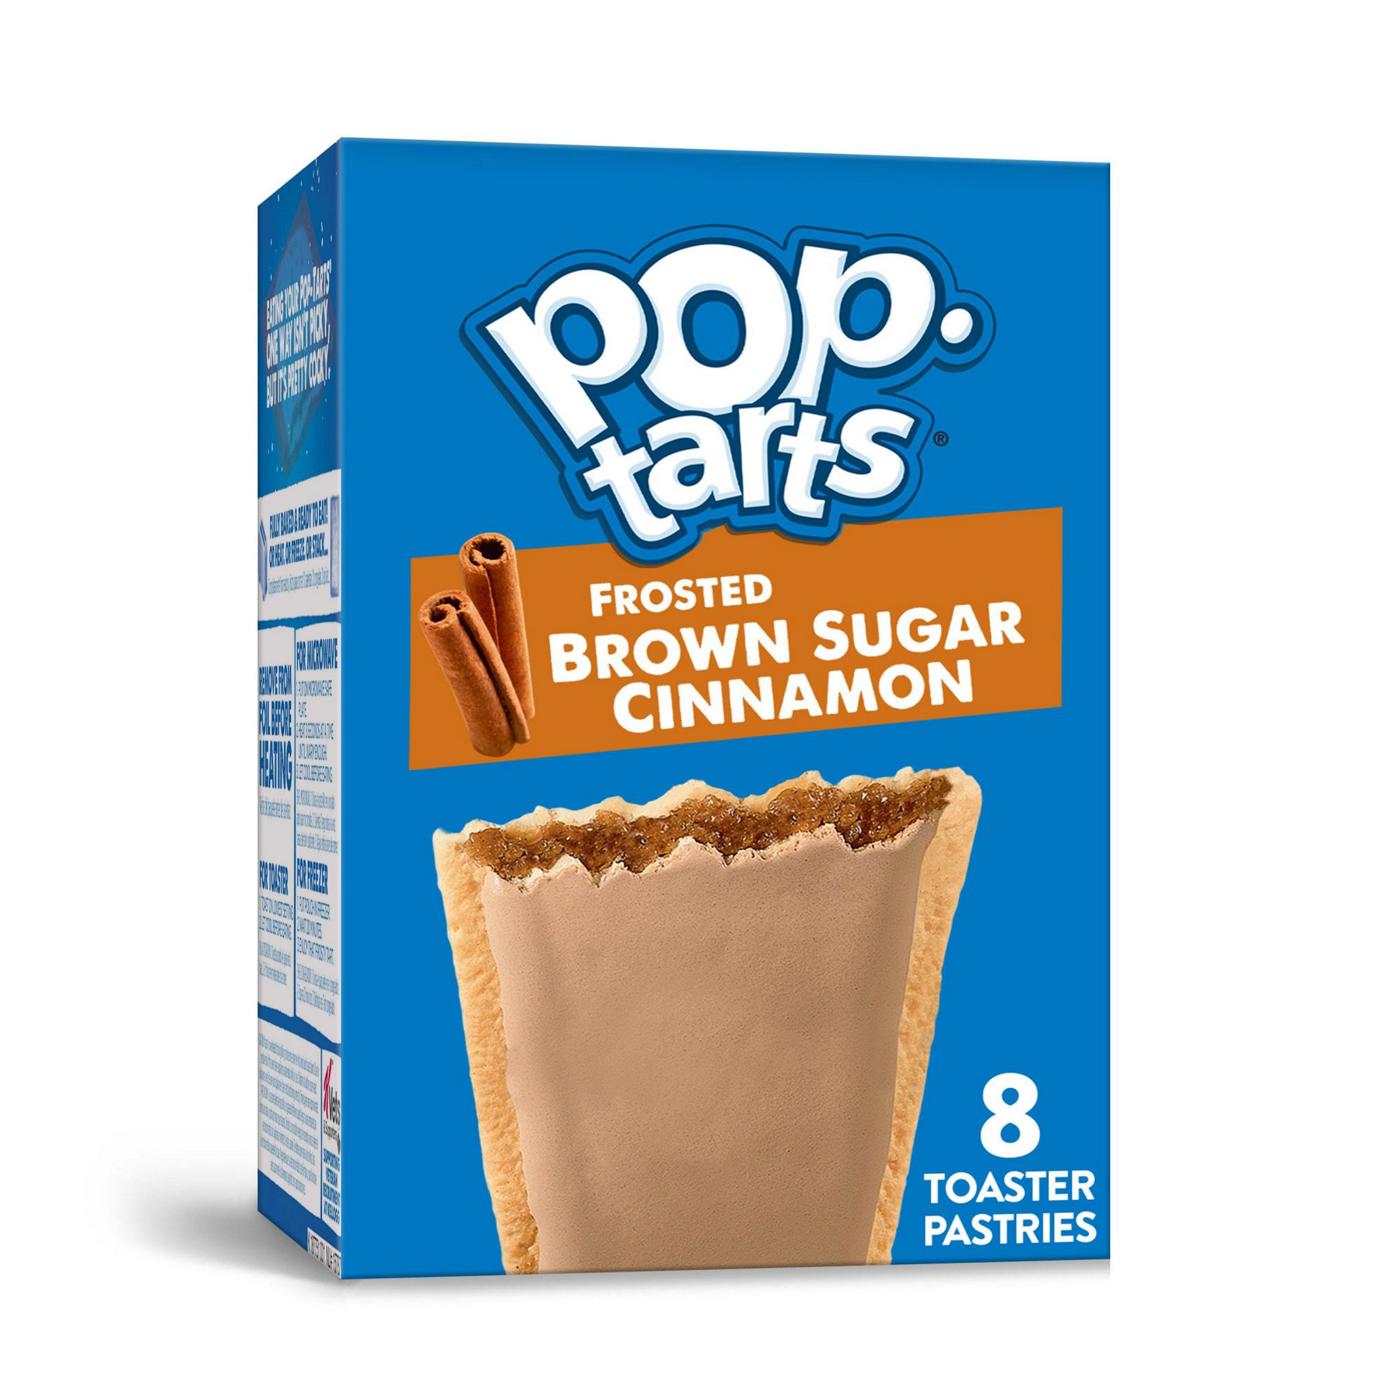 Pop-Tarts Frosted Brown Sugar Cinnamon Toaster Pastries; image 8 of 12